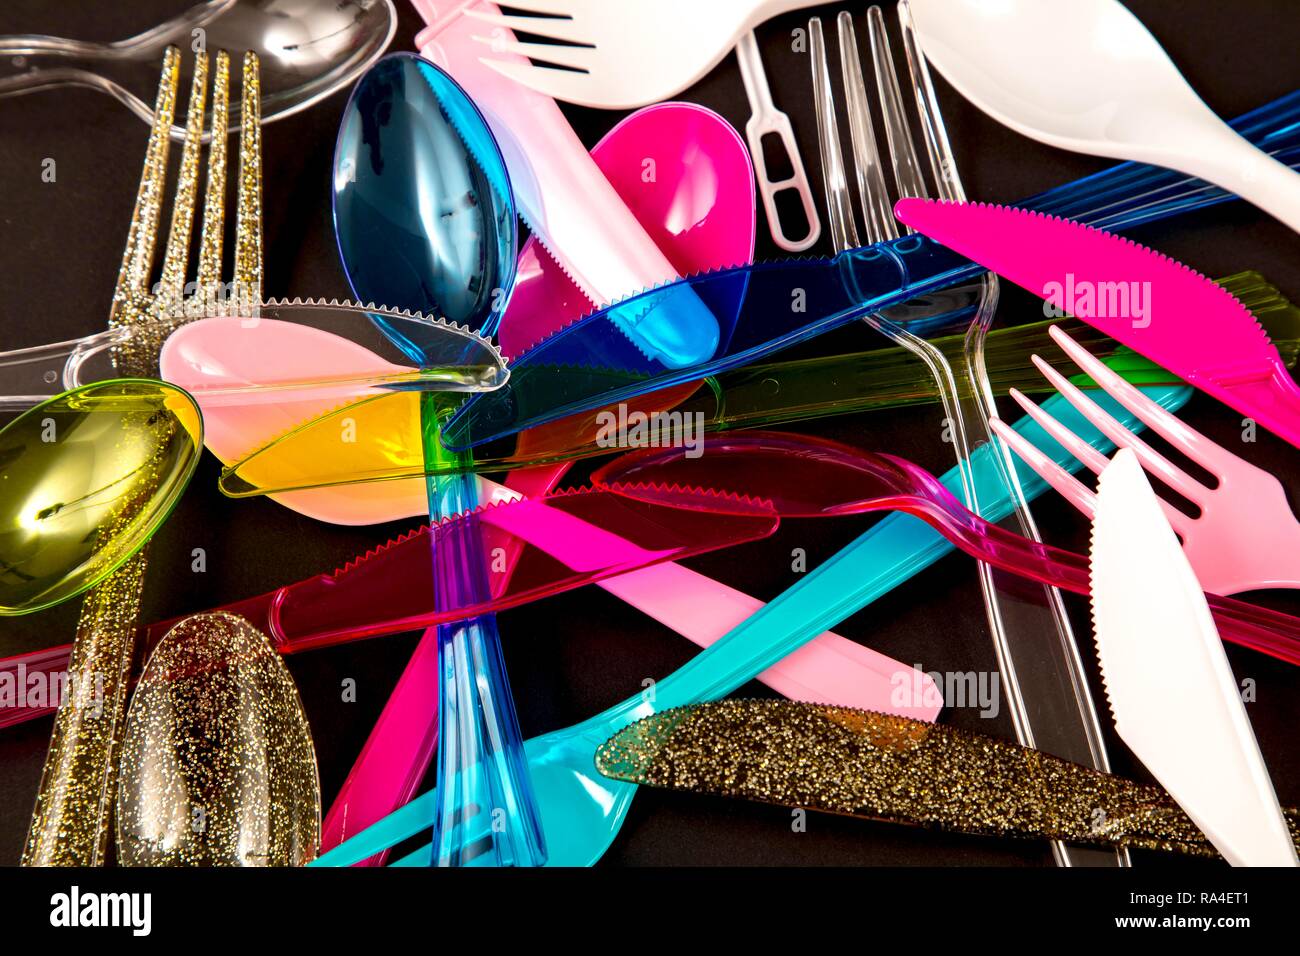 Plastic cutlery, disposable cutlery, knives, forks, spoons, plastic waste, various colours, types Stock Photo